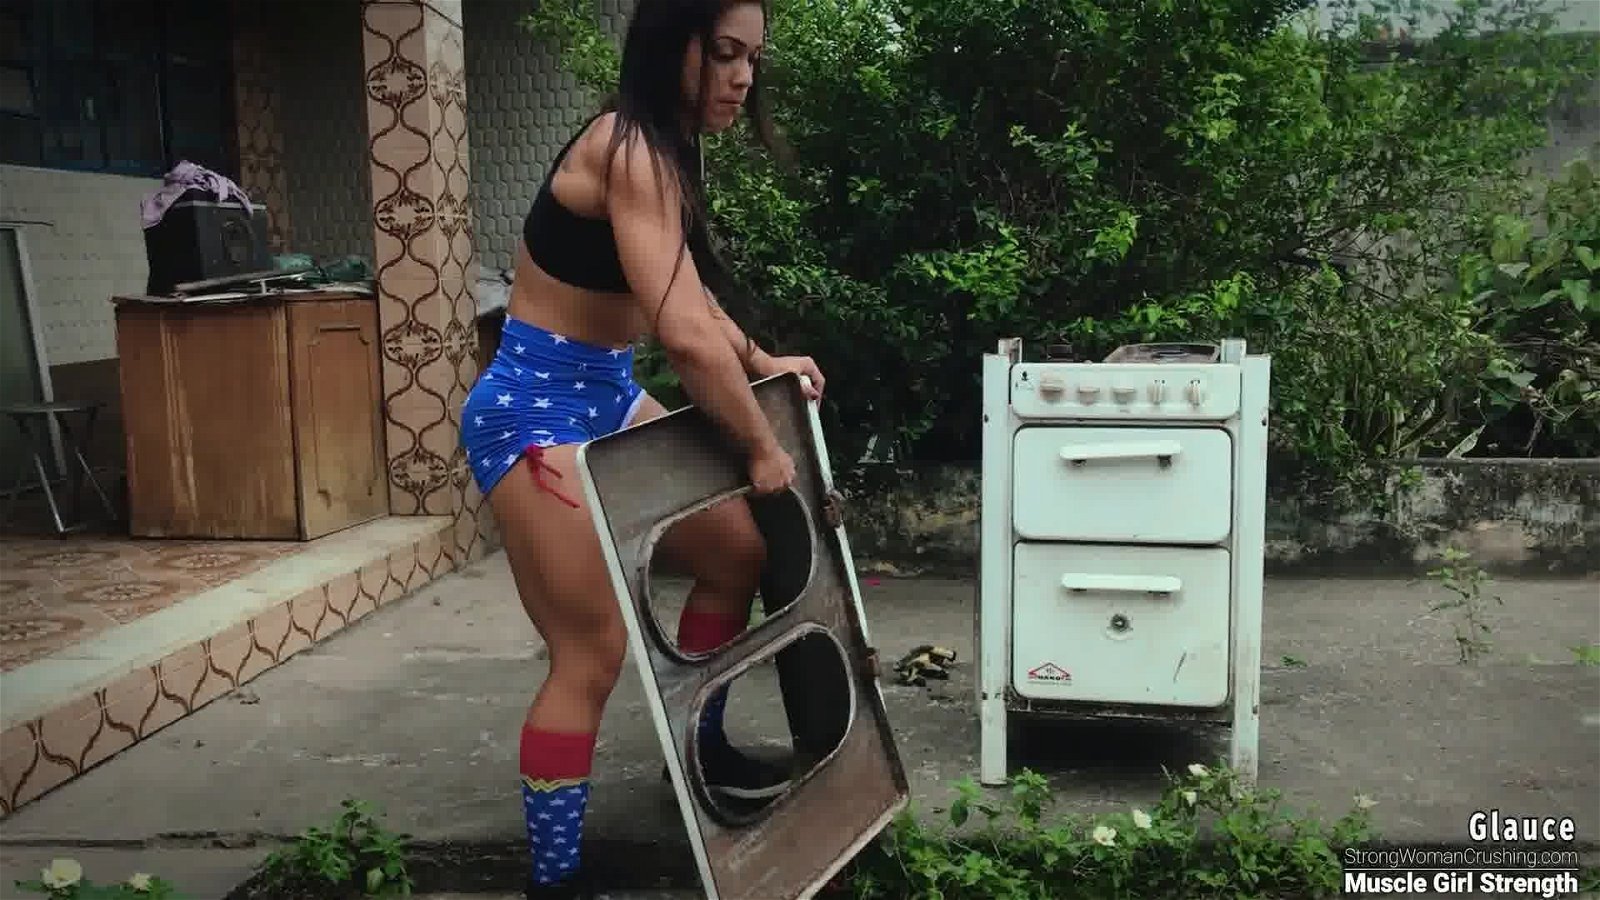 Photo by MusclegirlStrength with the username @MusclegirlStrength, who is a brand user,  January 5, 2024 at 8:21 PM and the text says 'Muscle Goddess vs. Fiery Inferno: Epic Halloween Stove Demolition!
Link:  https://bit.ly/3FN9IxC

Double tap if you are ready to witness the power of Glauce 💪💥 Join our monthly membership starting at 8.99 and indulge in the mesmerizing world of..'